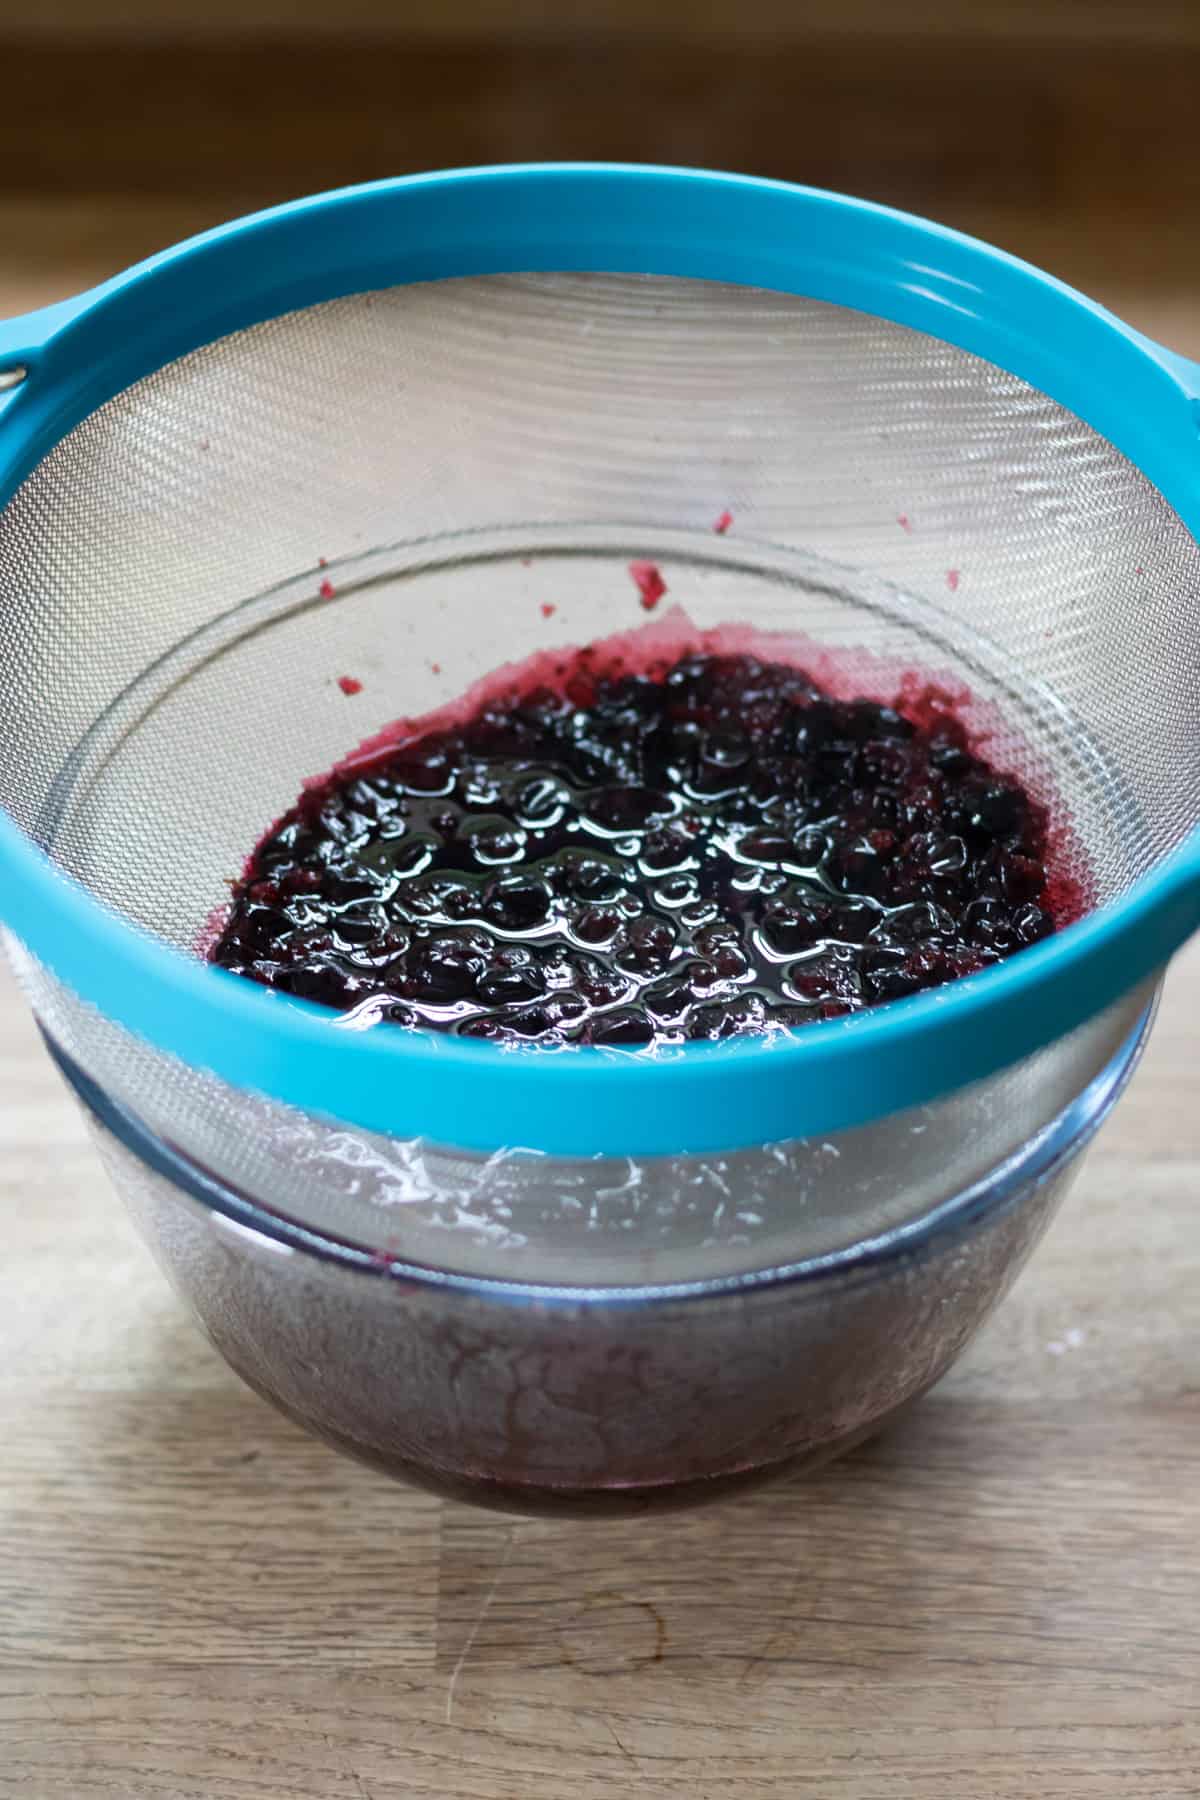 Straining the blackcurrant syrup into a bowl.